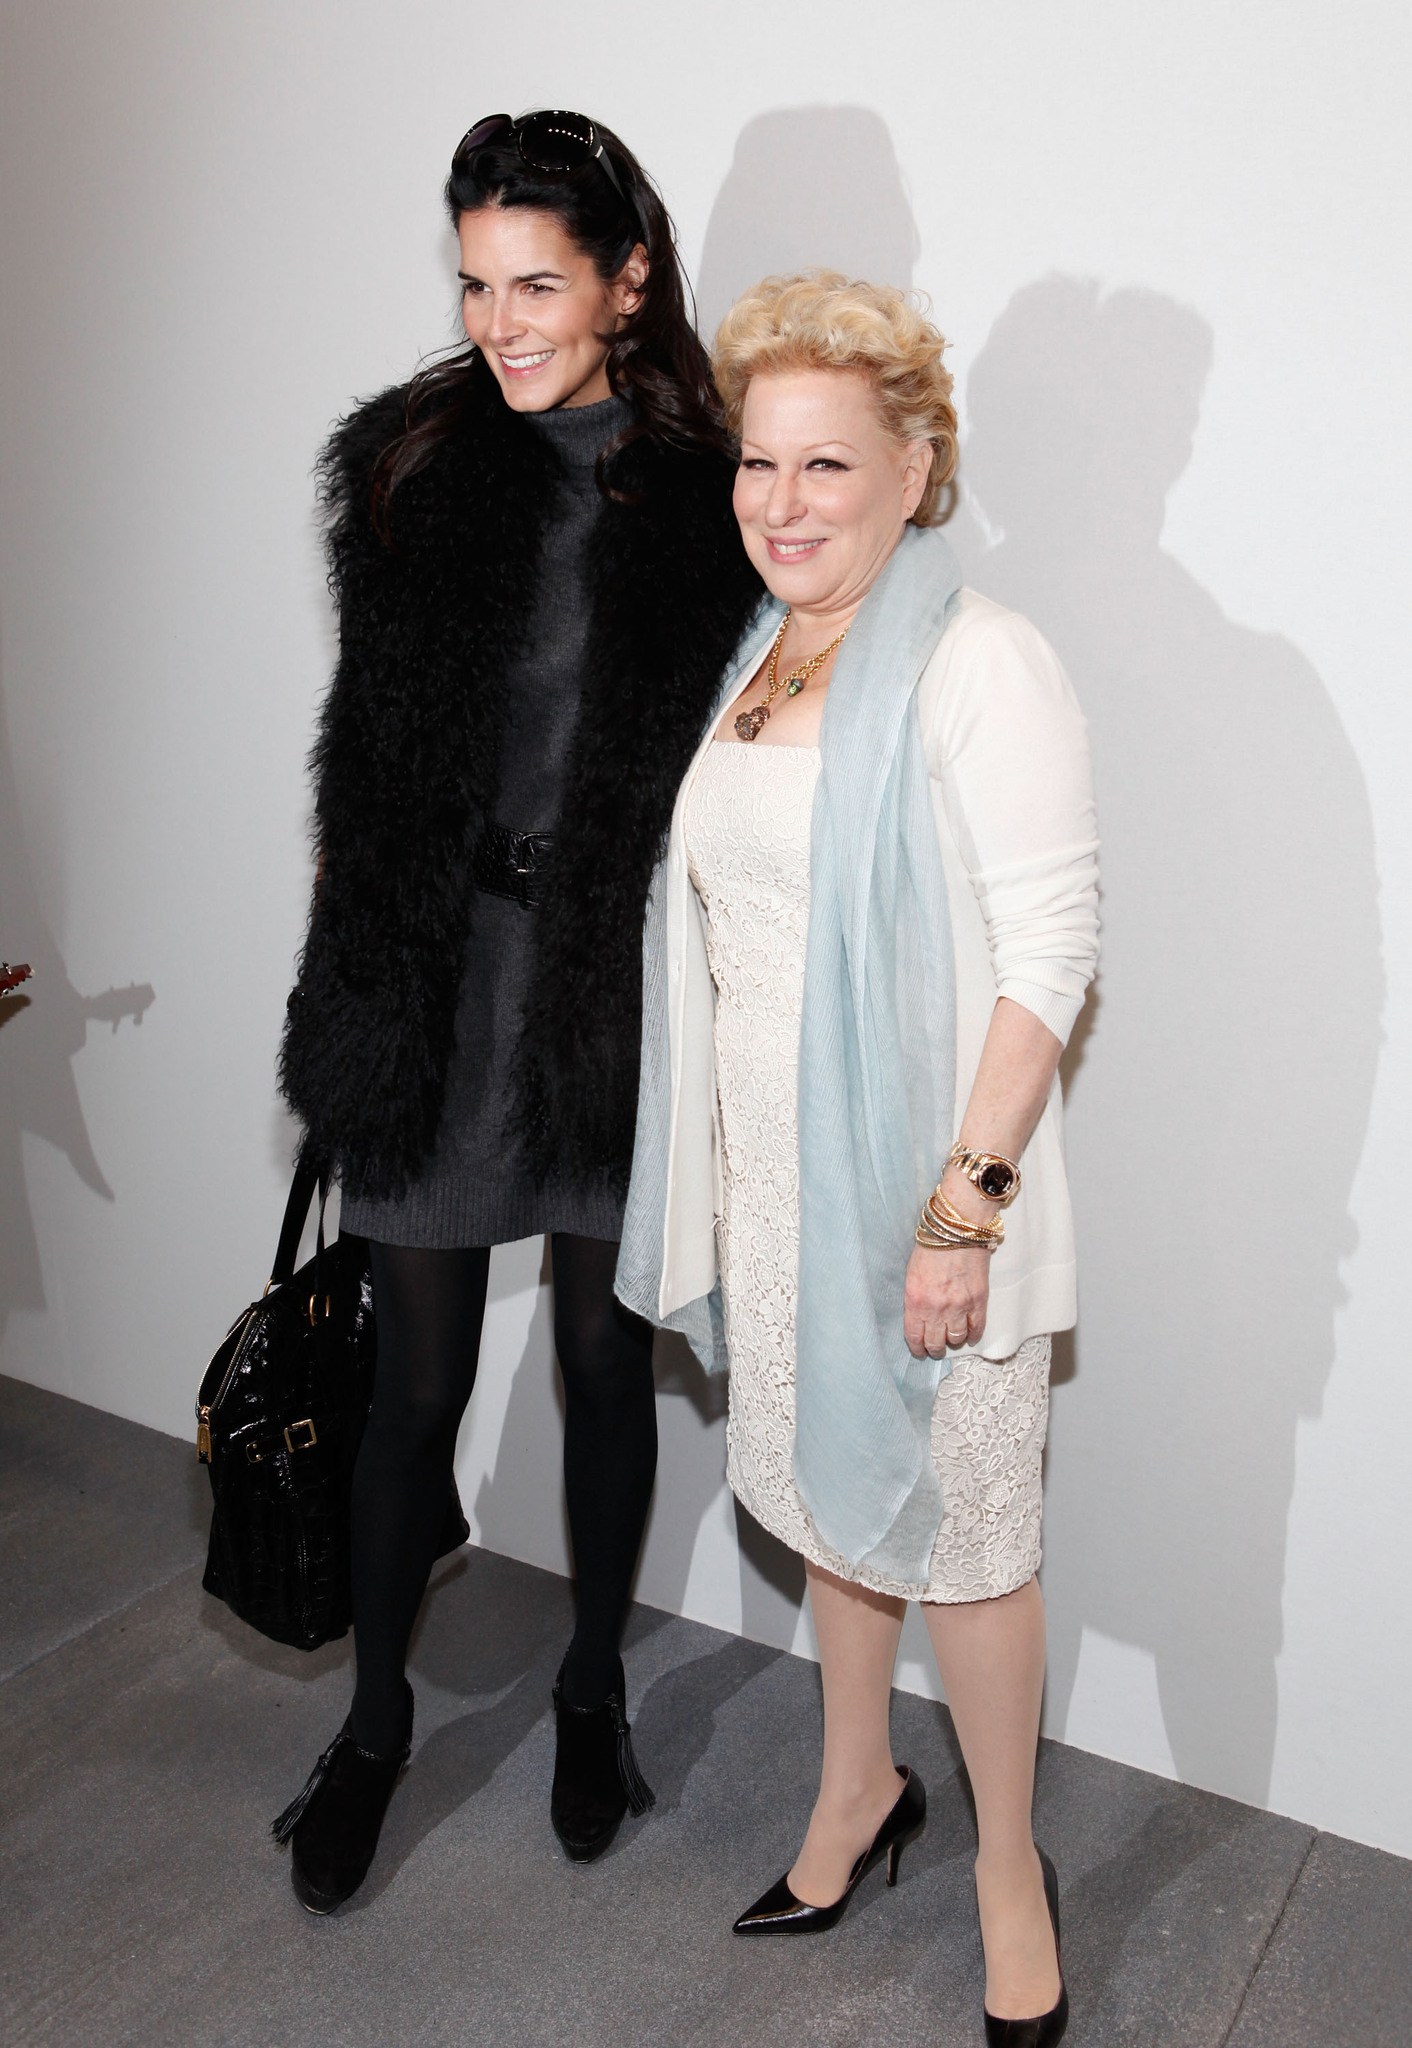 Bette Midler and Angie Harmon